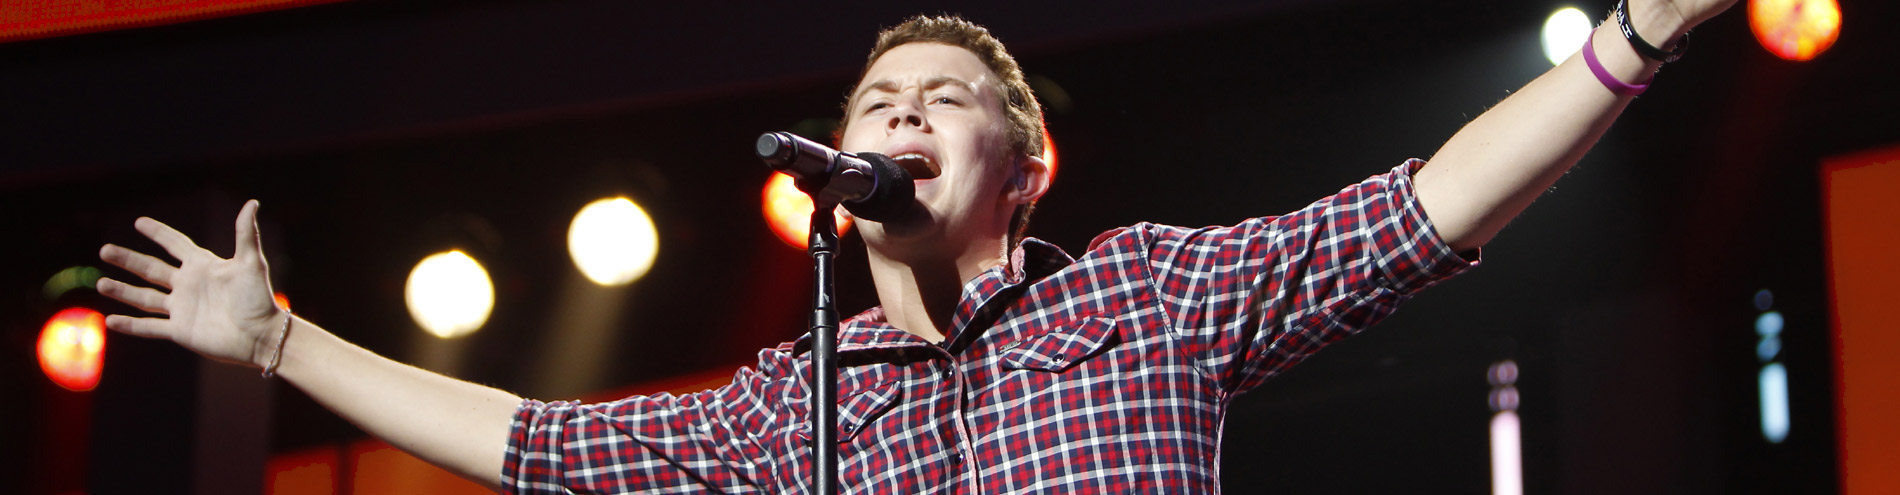 Scotty McCreery Hagerstown MD Tickets